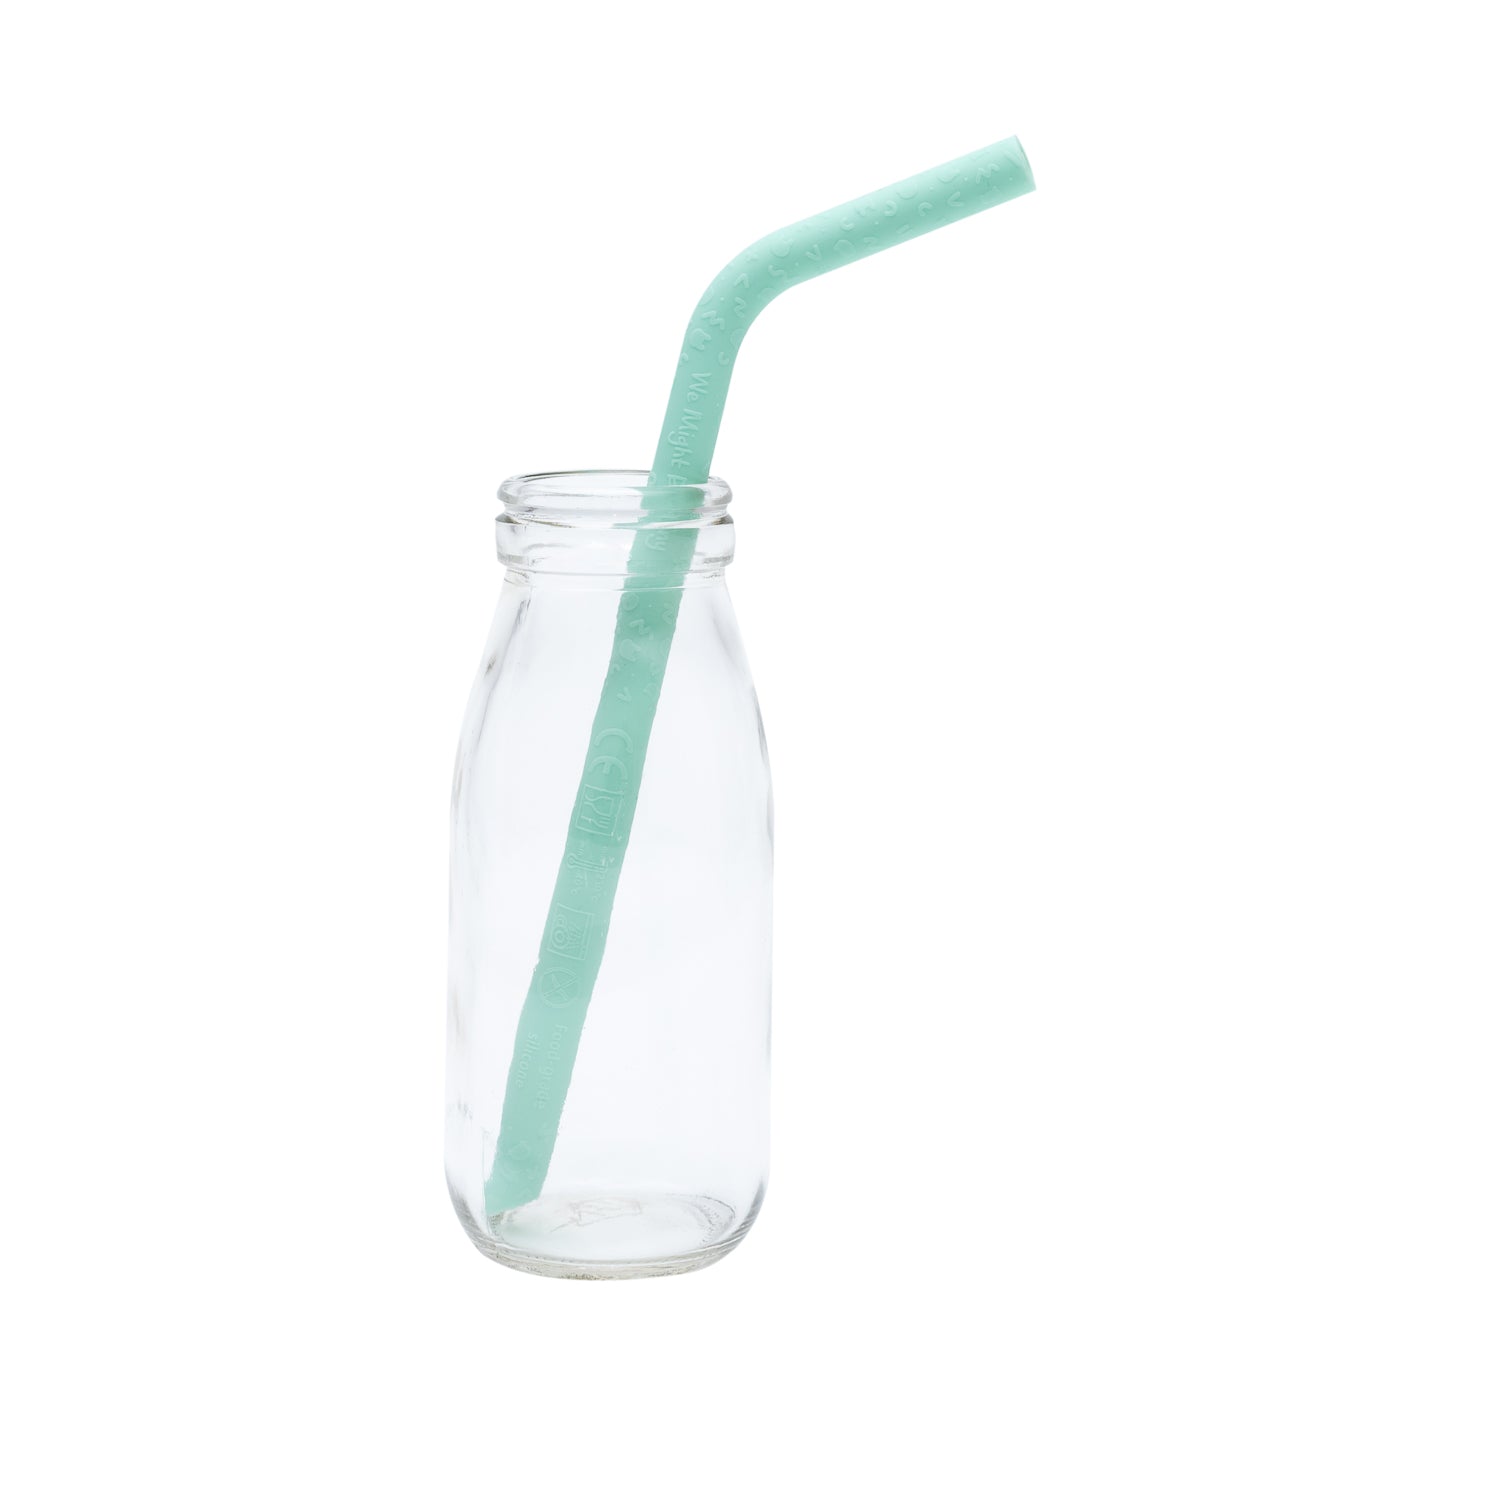 Silicone straw in mint